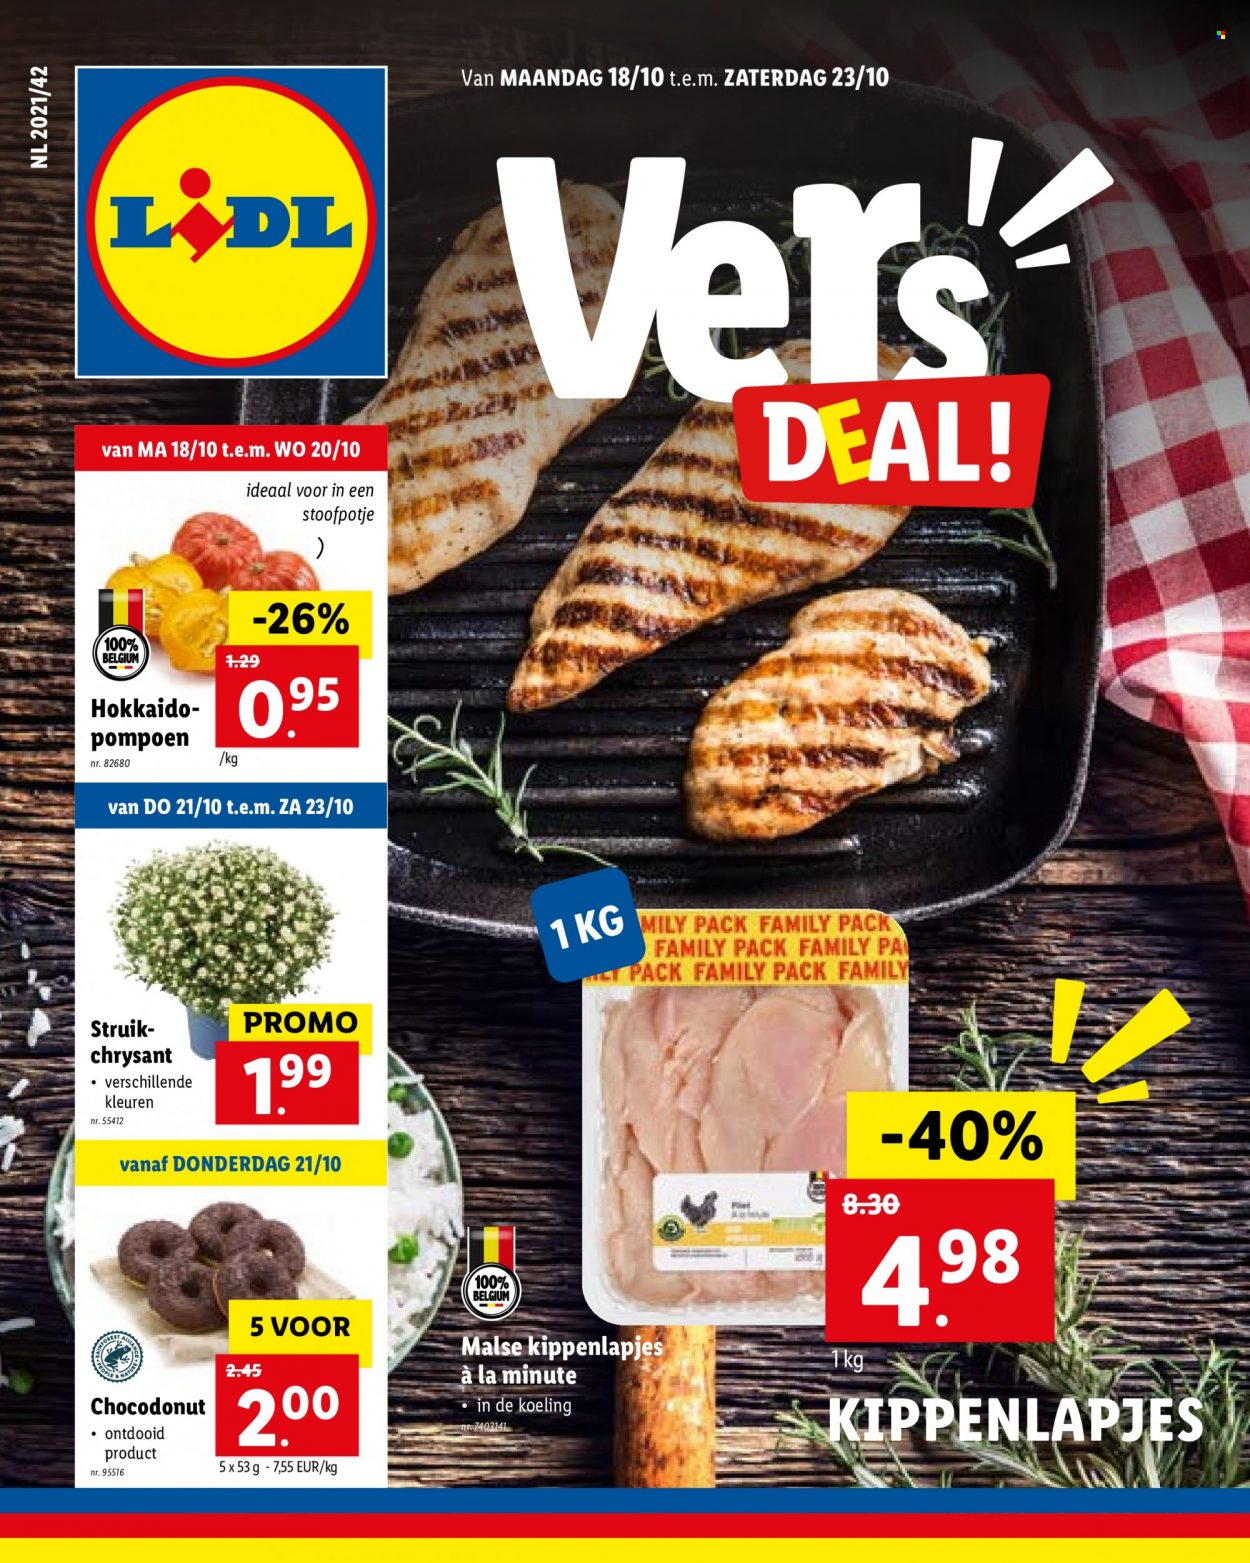 Catalogue Lidl - 18.10.2021 - 23.10.2021. Page 1.